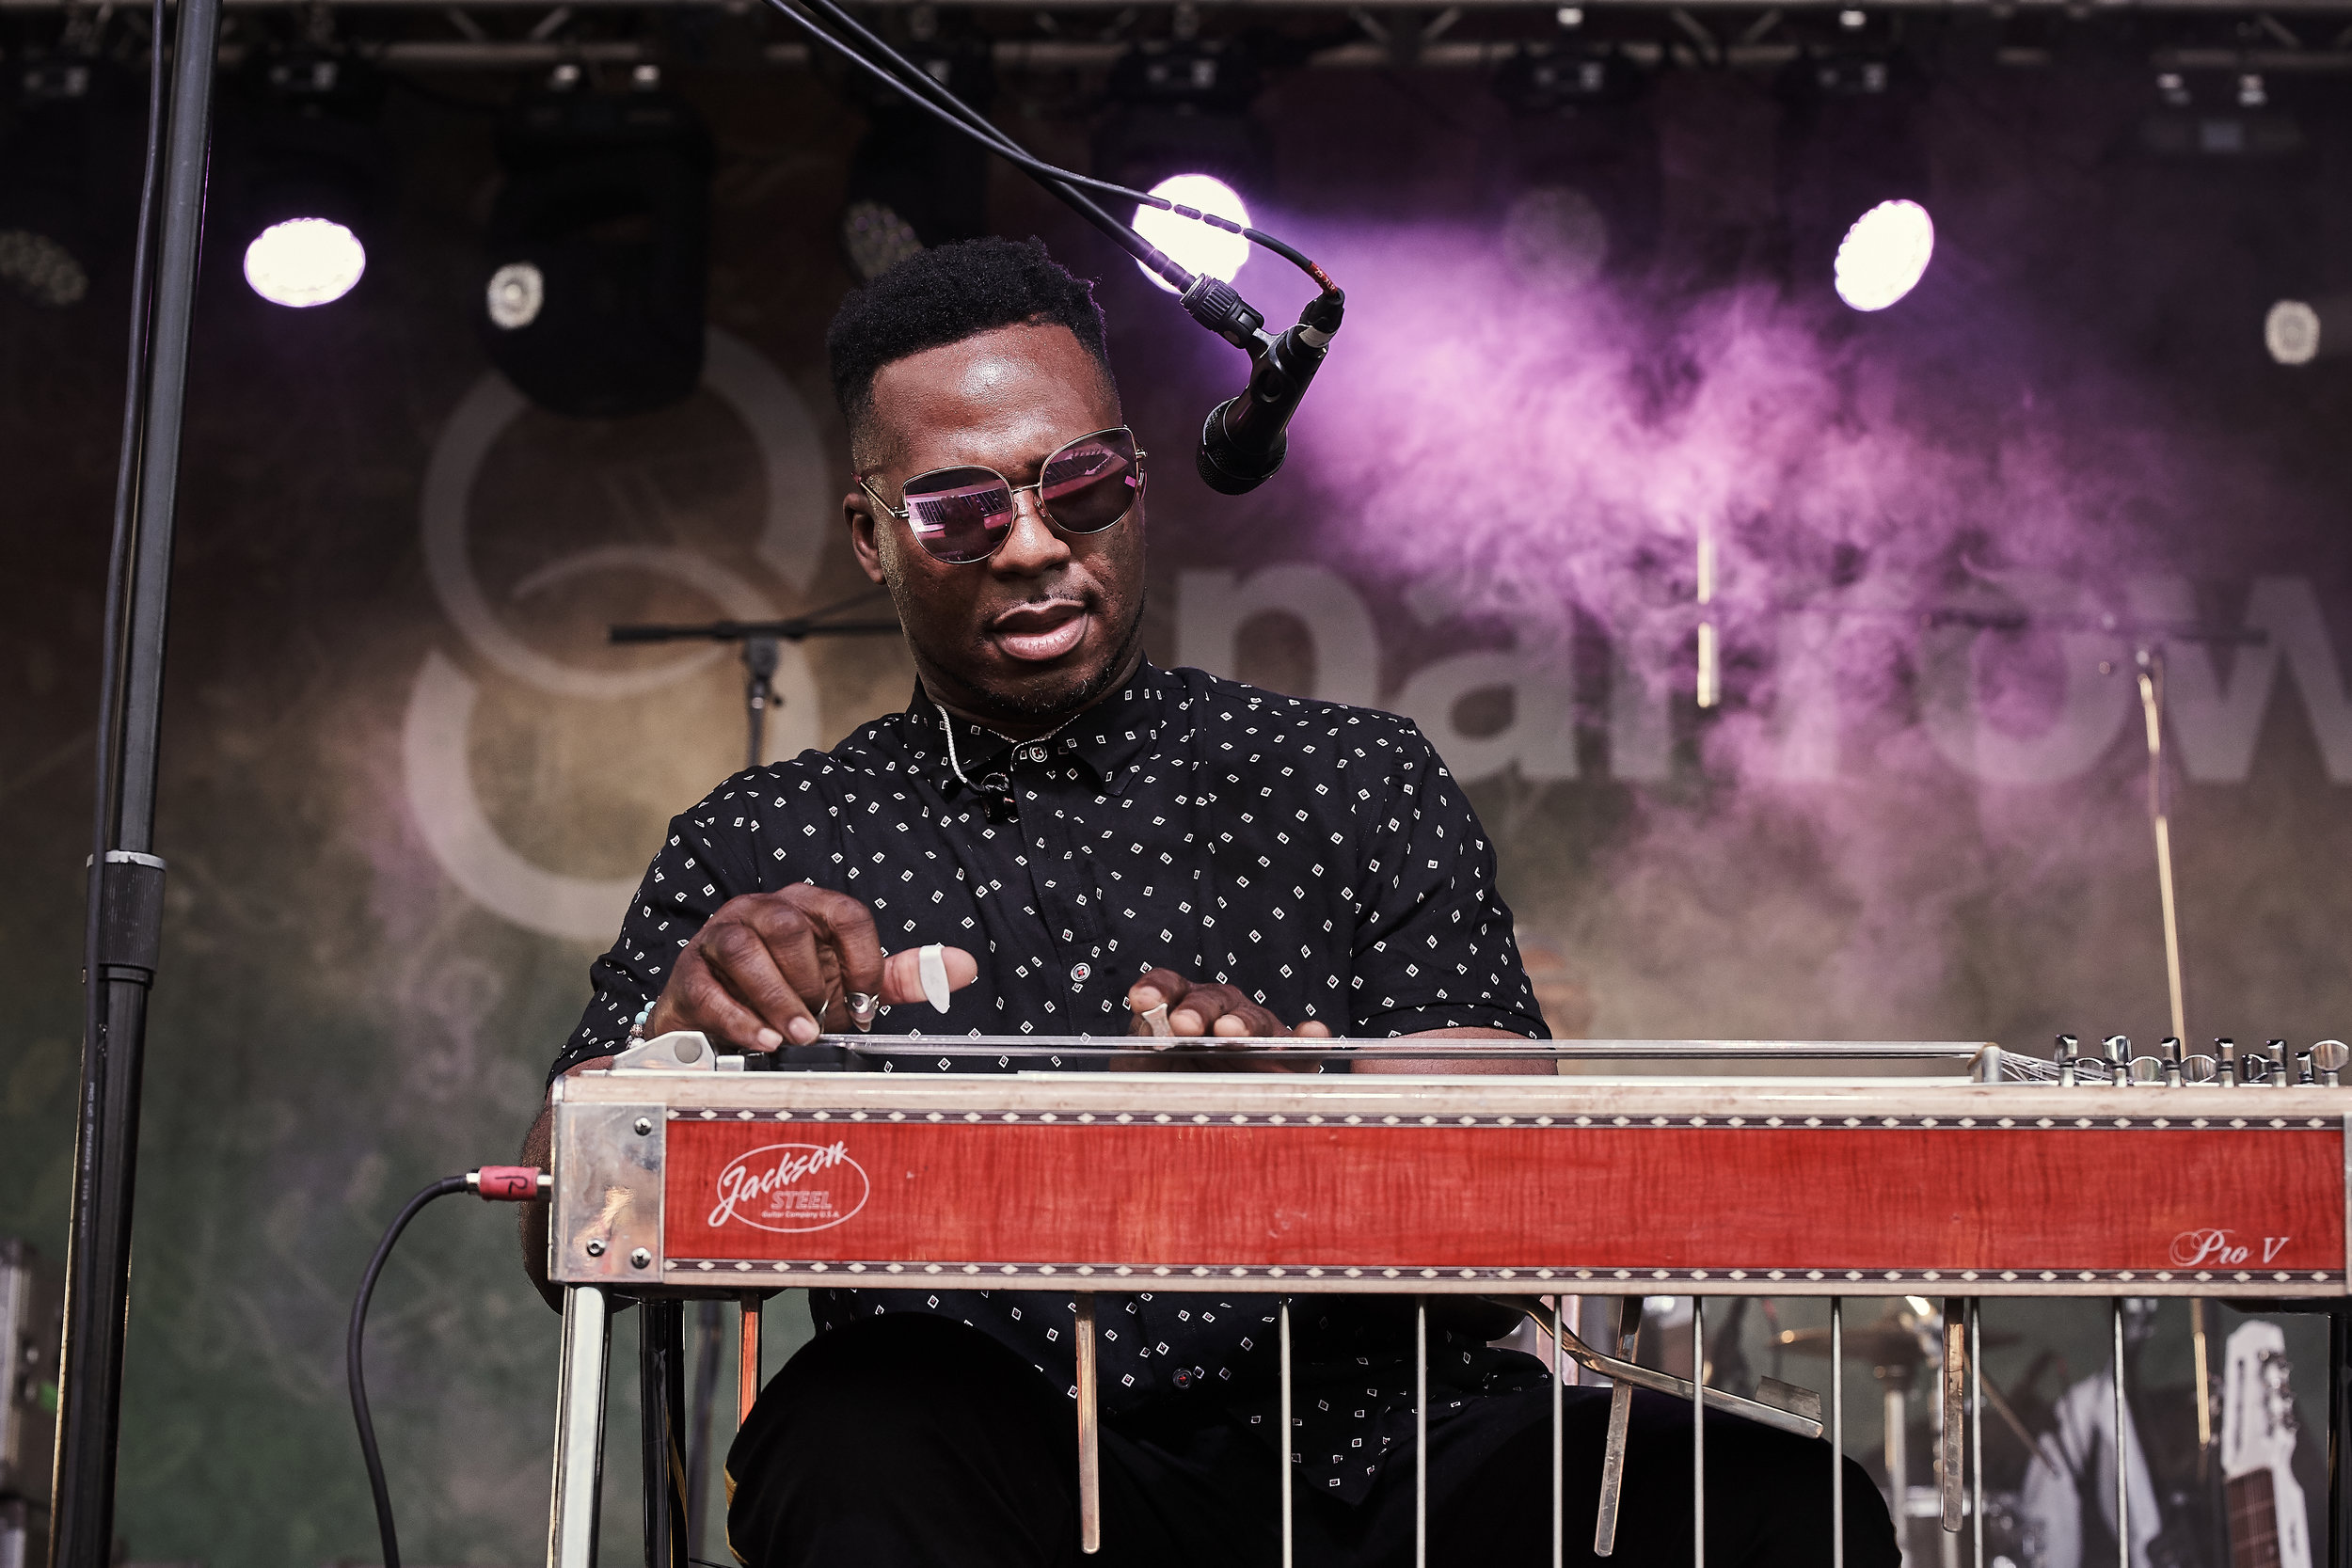    Robert Randolph    and the Family Band  // 2019-06-27 //   Common Ground Music Festival     at    Adado Riverfront Park  - Lansing, MI // Photos by  Attila Hardy  